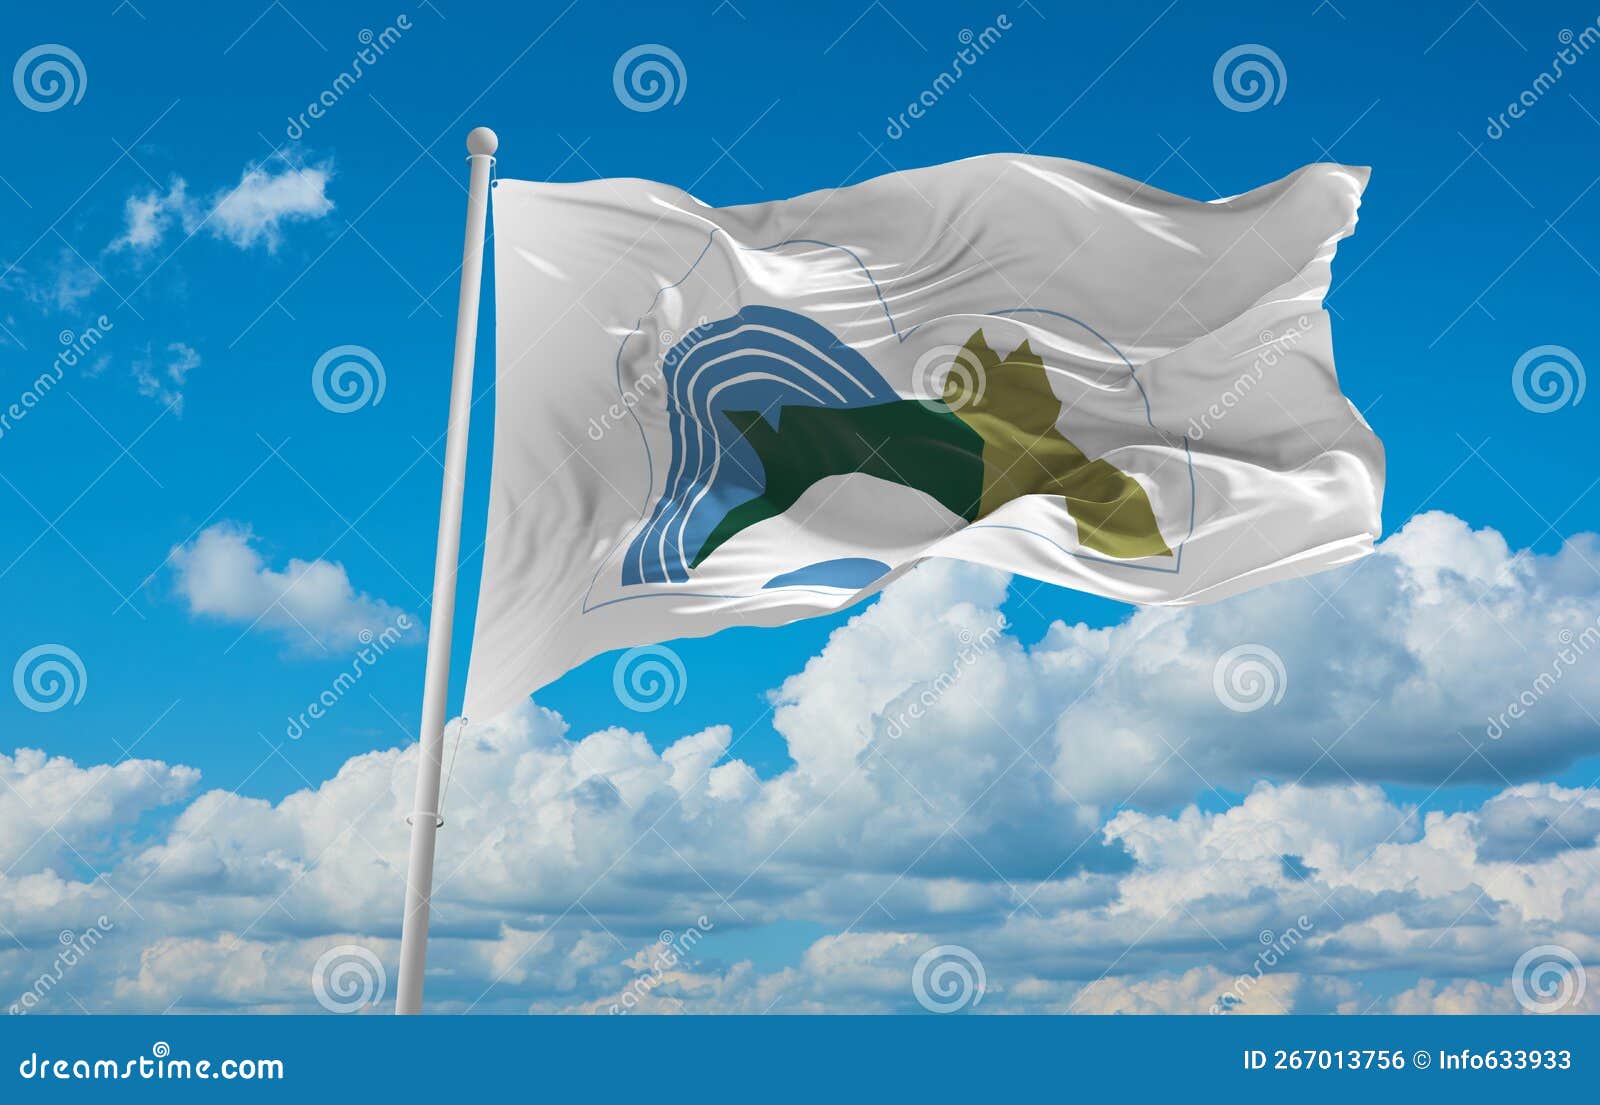 official flag of inuvik canada at cloudy sky background on sunset, panoramic view. canadian travel and patriot concept. copy space